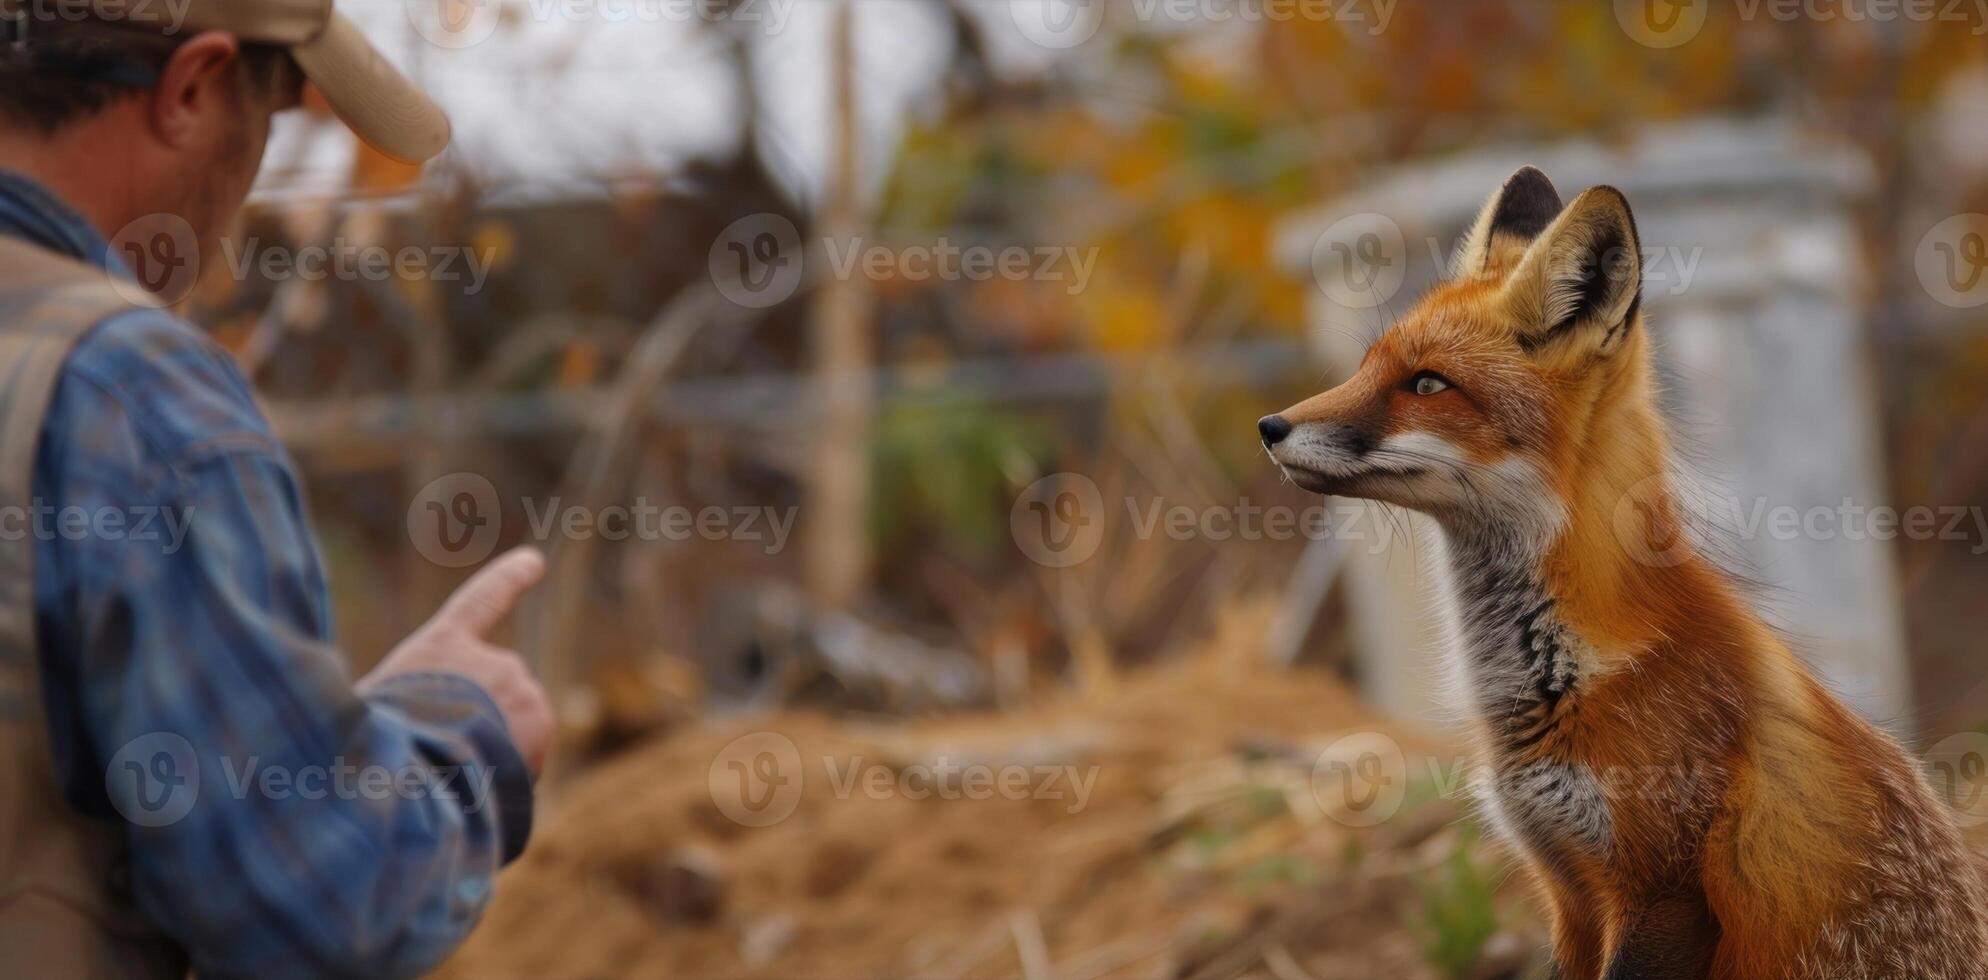 A young fox peering curiously at a construction site from a safe distance while a construction worker points to a nearby designated wildlife corridor that has been set up for the animal photo